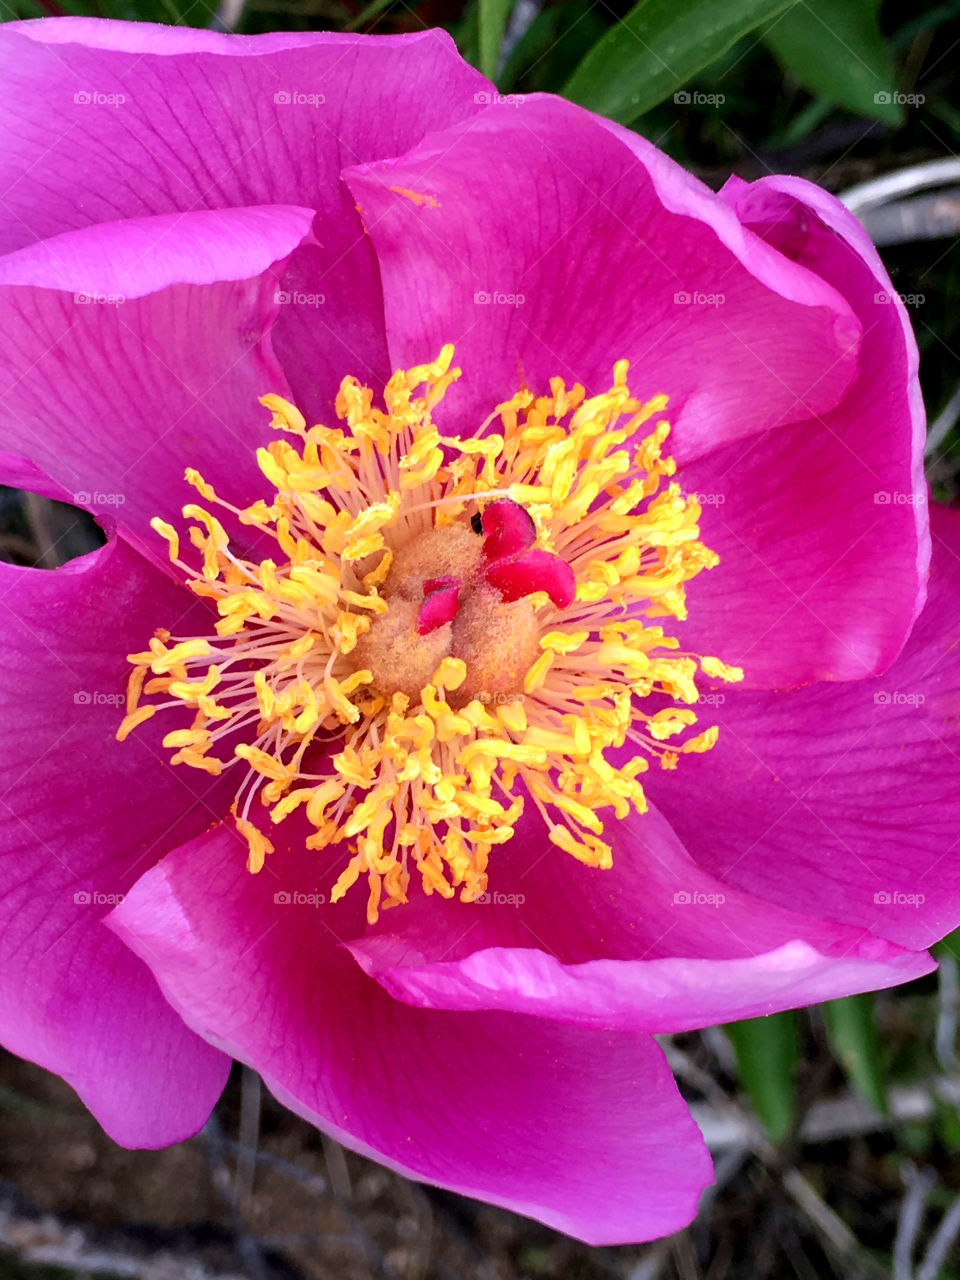 Pistils and stamens of a flower, yellow and pink colors